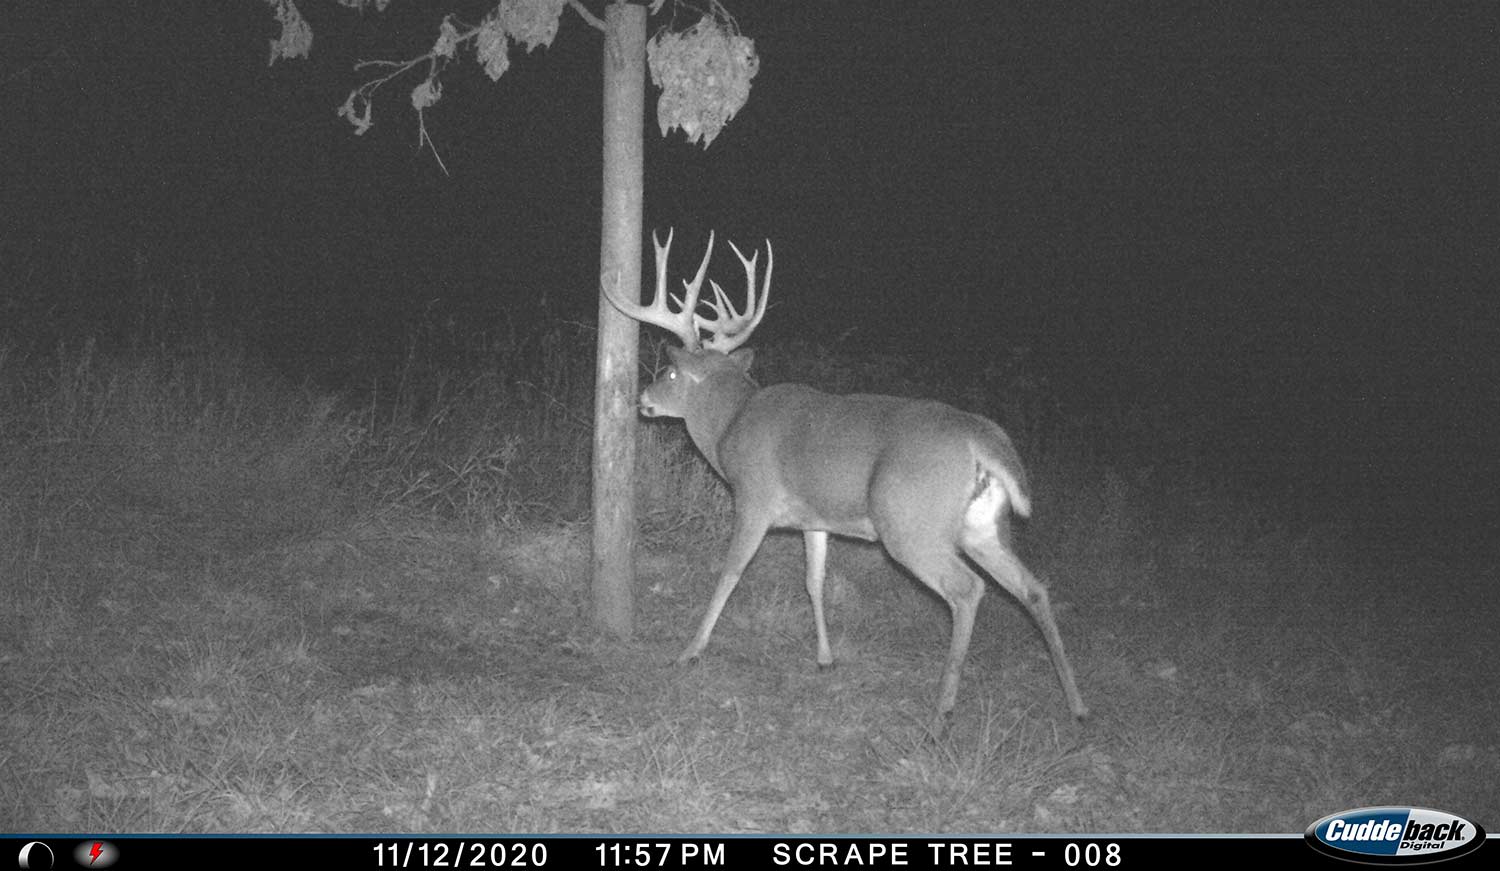 Trail camera footage of a whitetail deer at night next to a scraping tree.